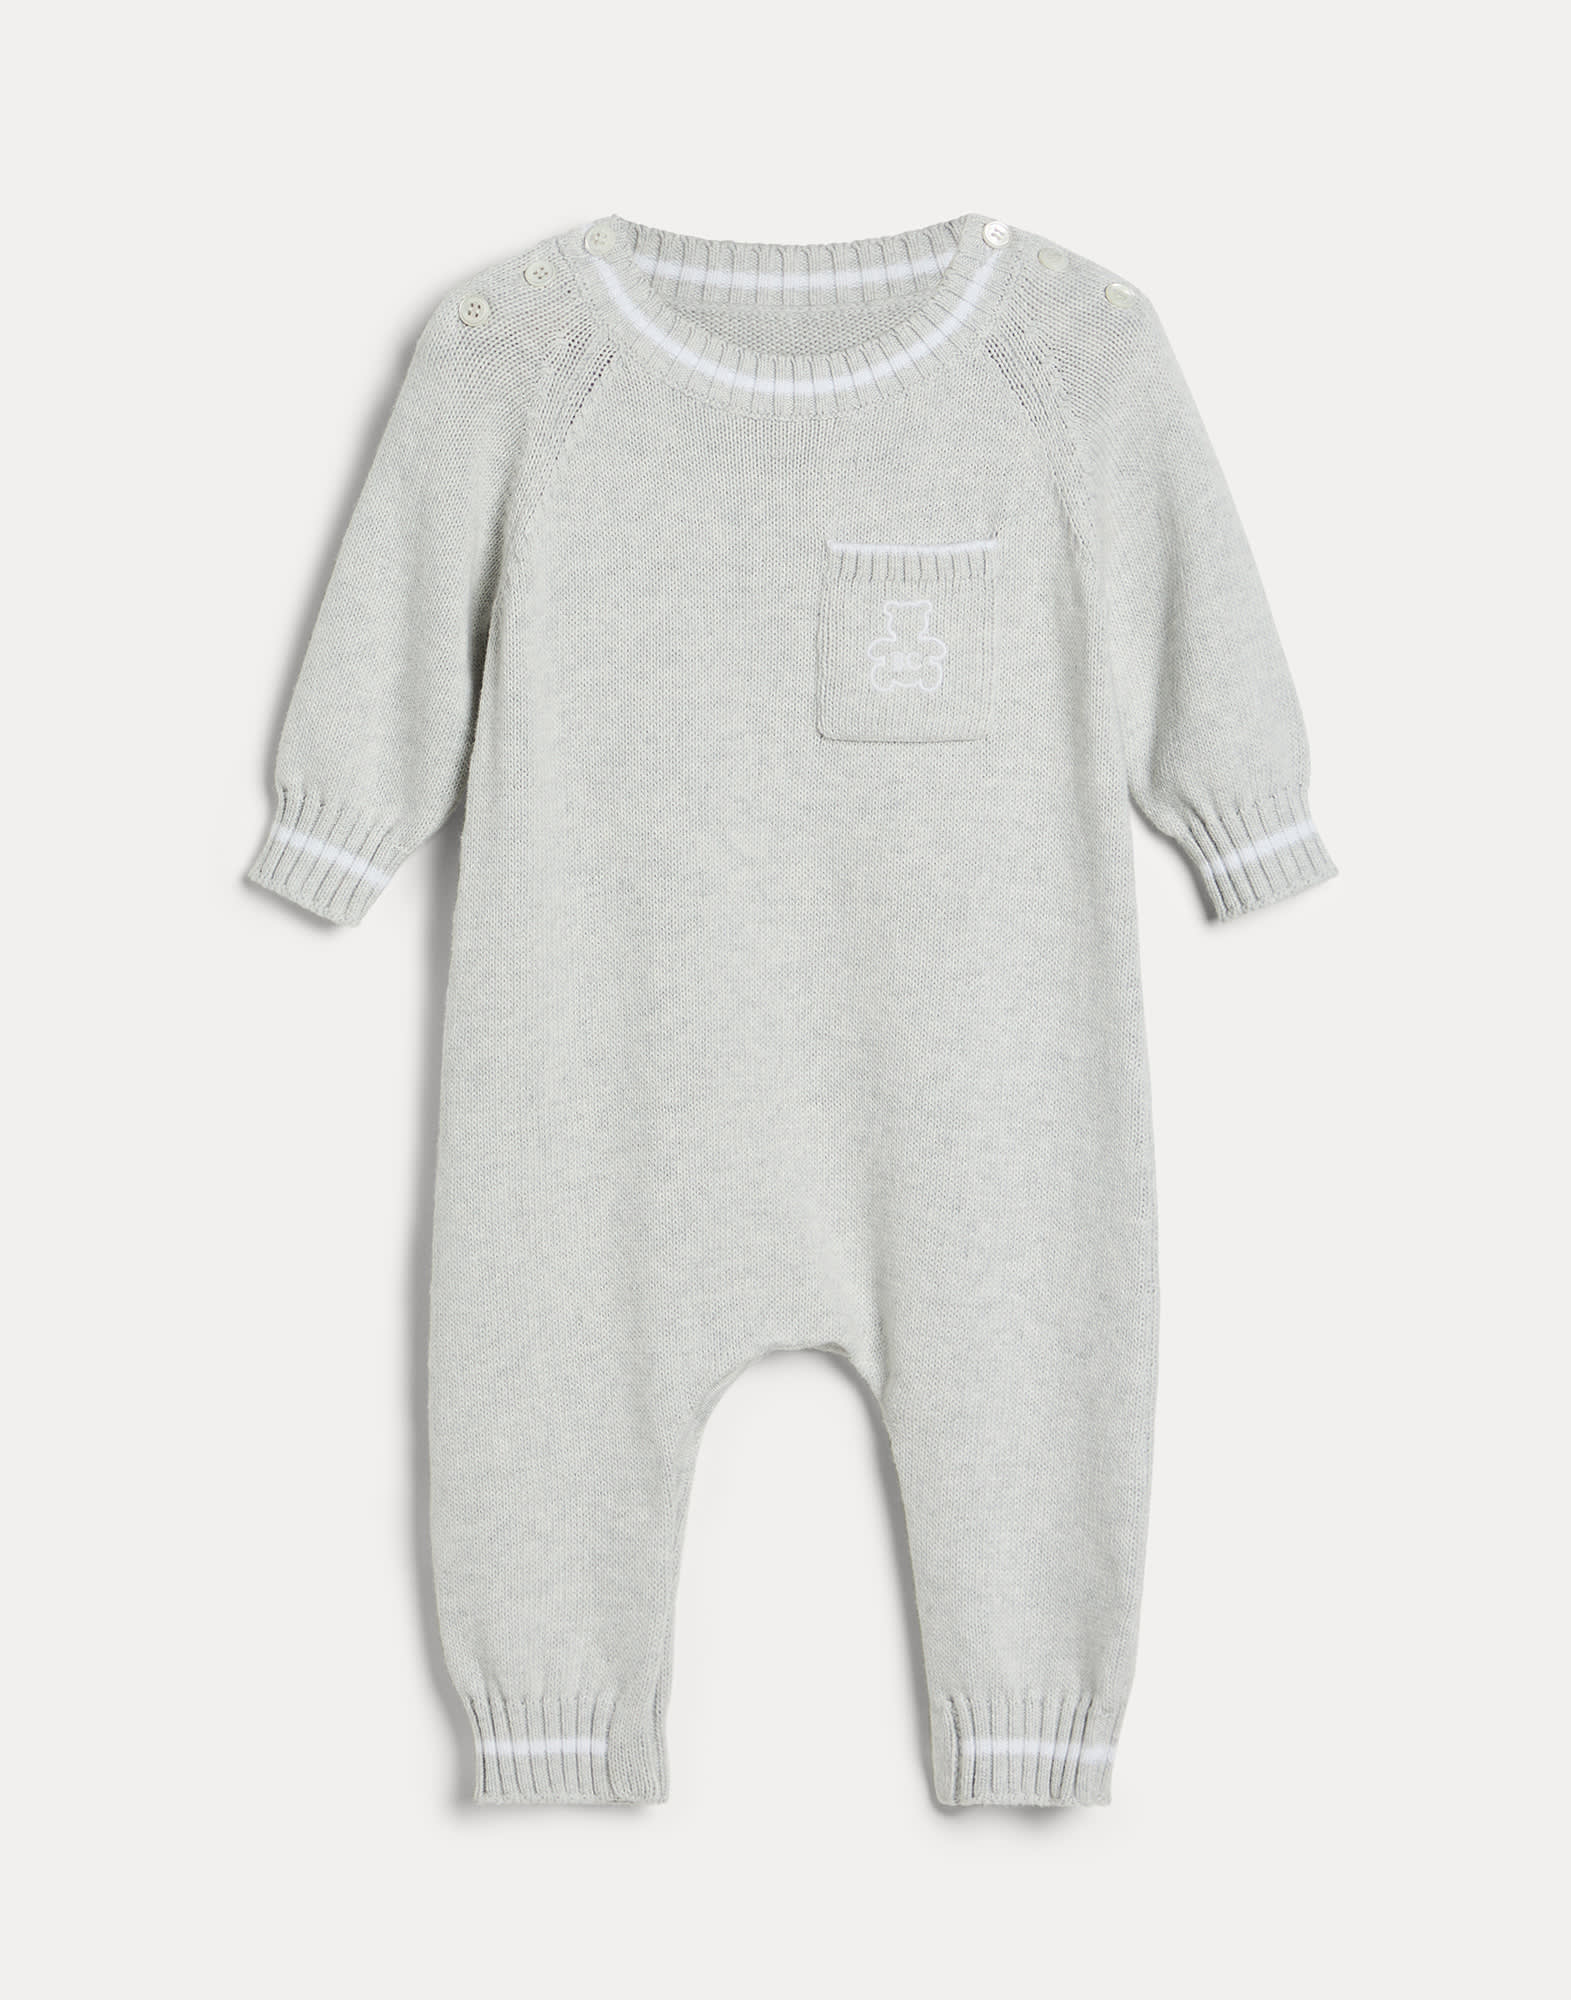 Baby body & Romper - Front view